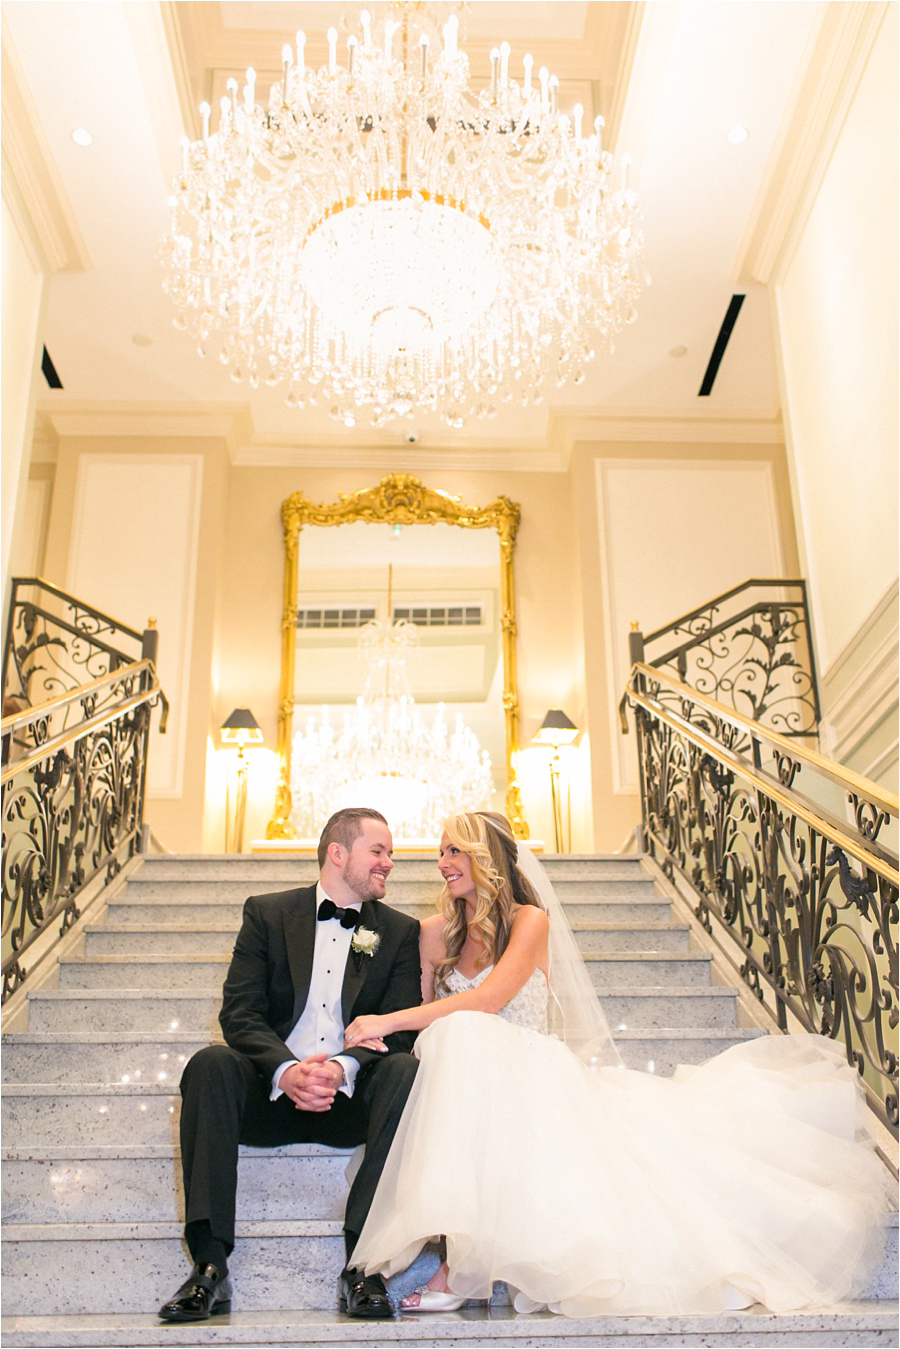 The Rockleigh Wedding - Amy Rizzuto Photography-1-2